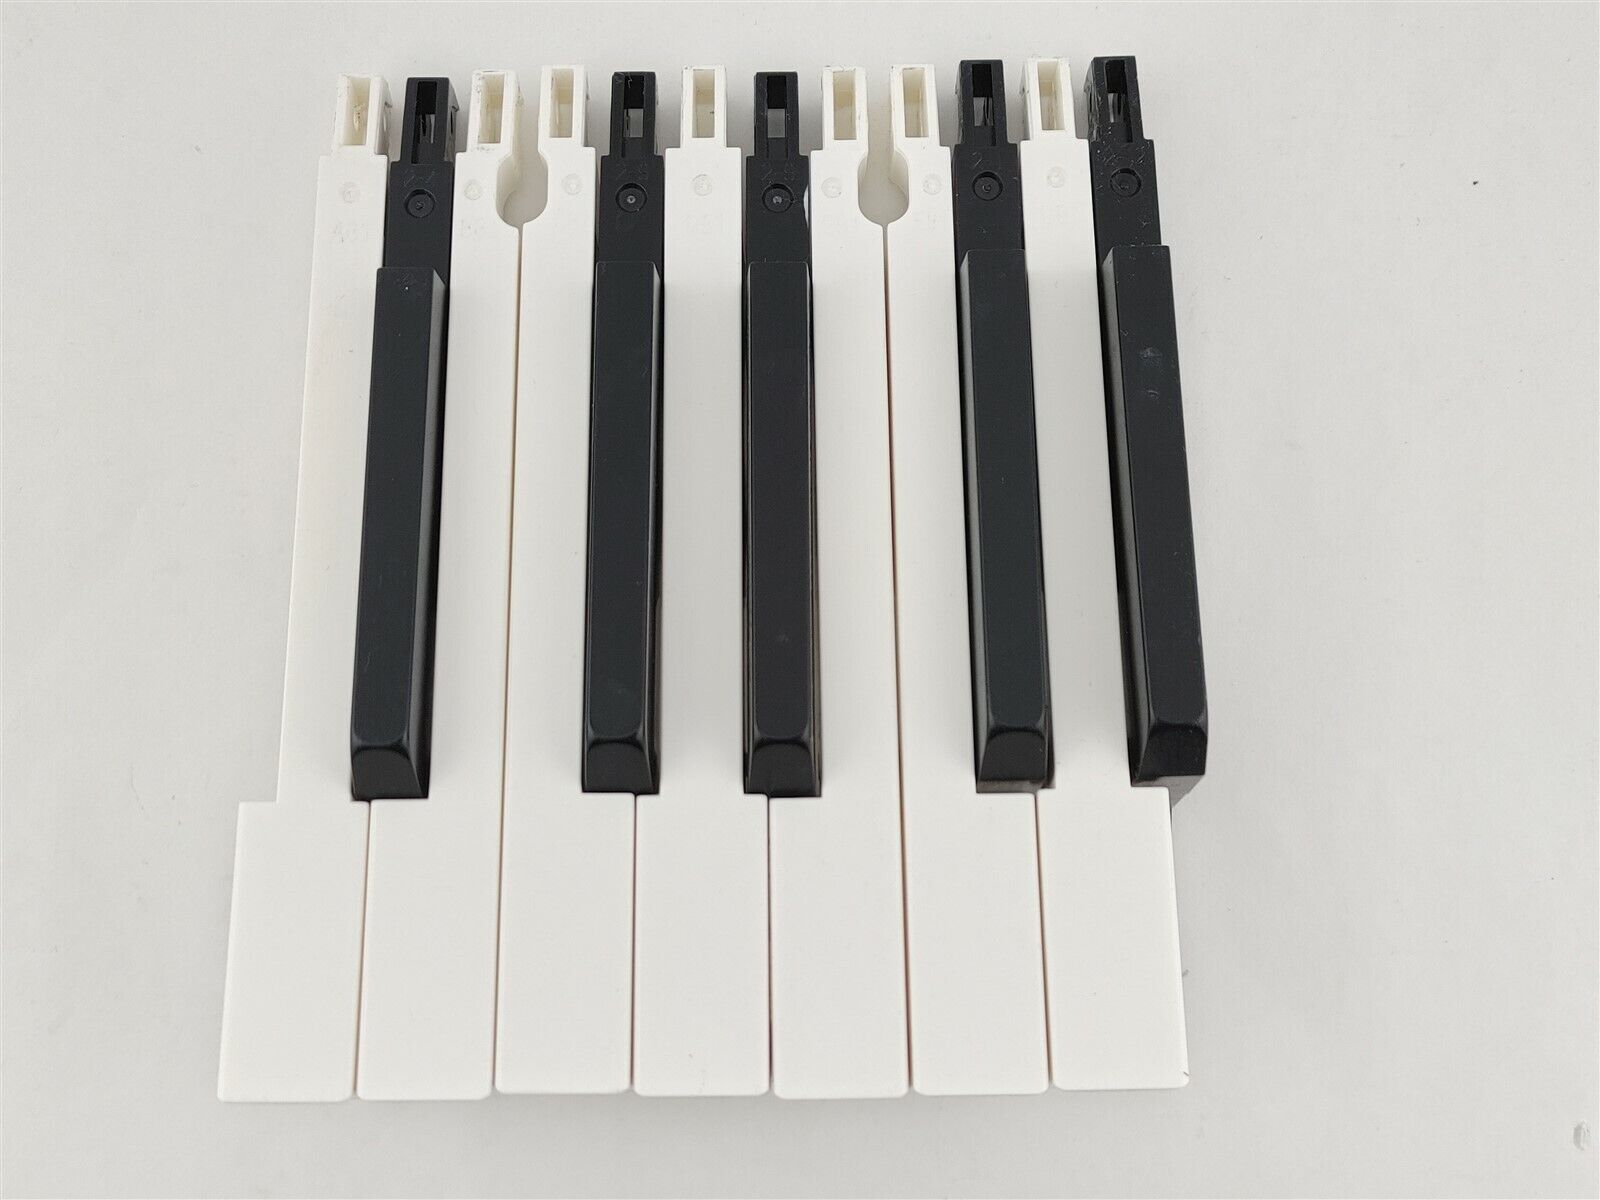 LOT 12 Casio Full Octave Keys Set Replacement PX-Series CDP-120 Keyboard Part Casio 12 Key Full Octave